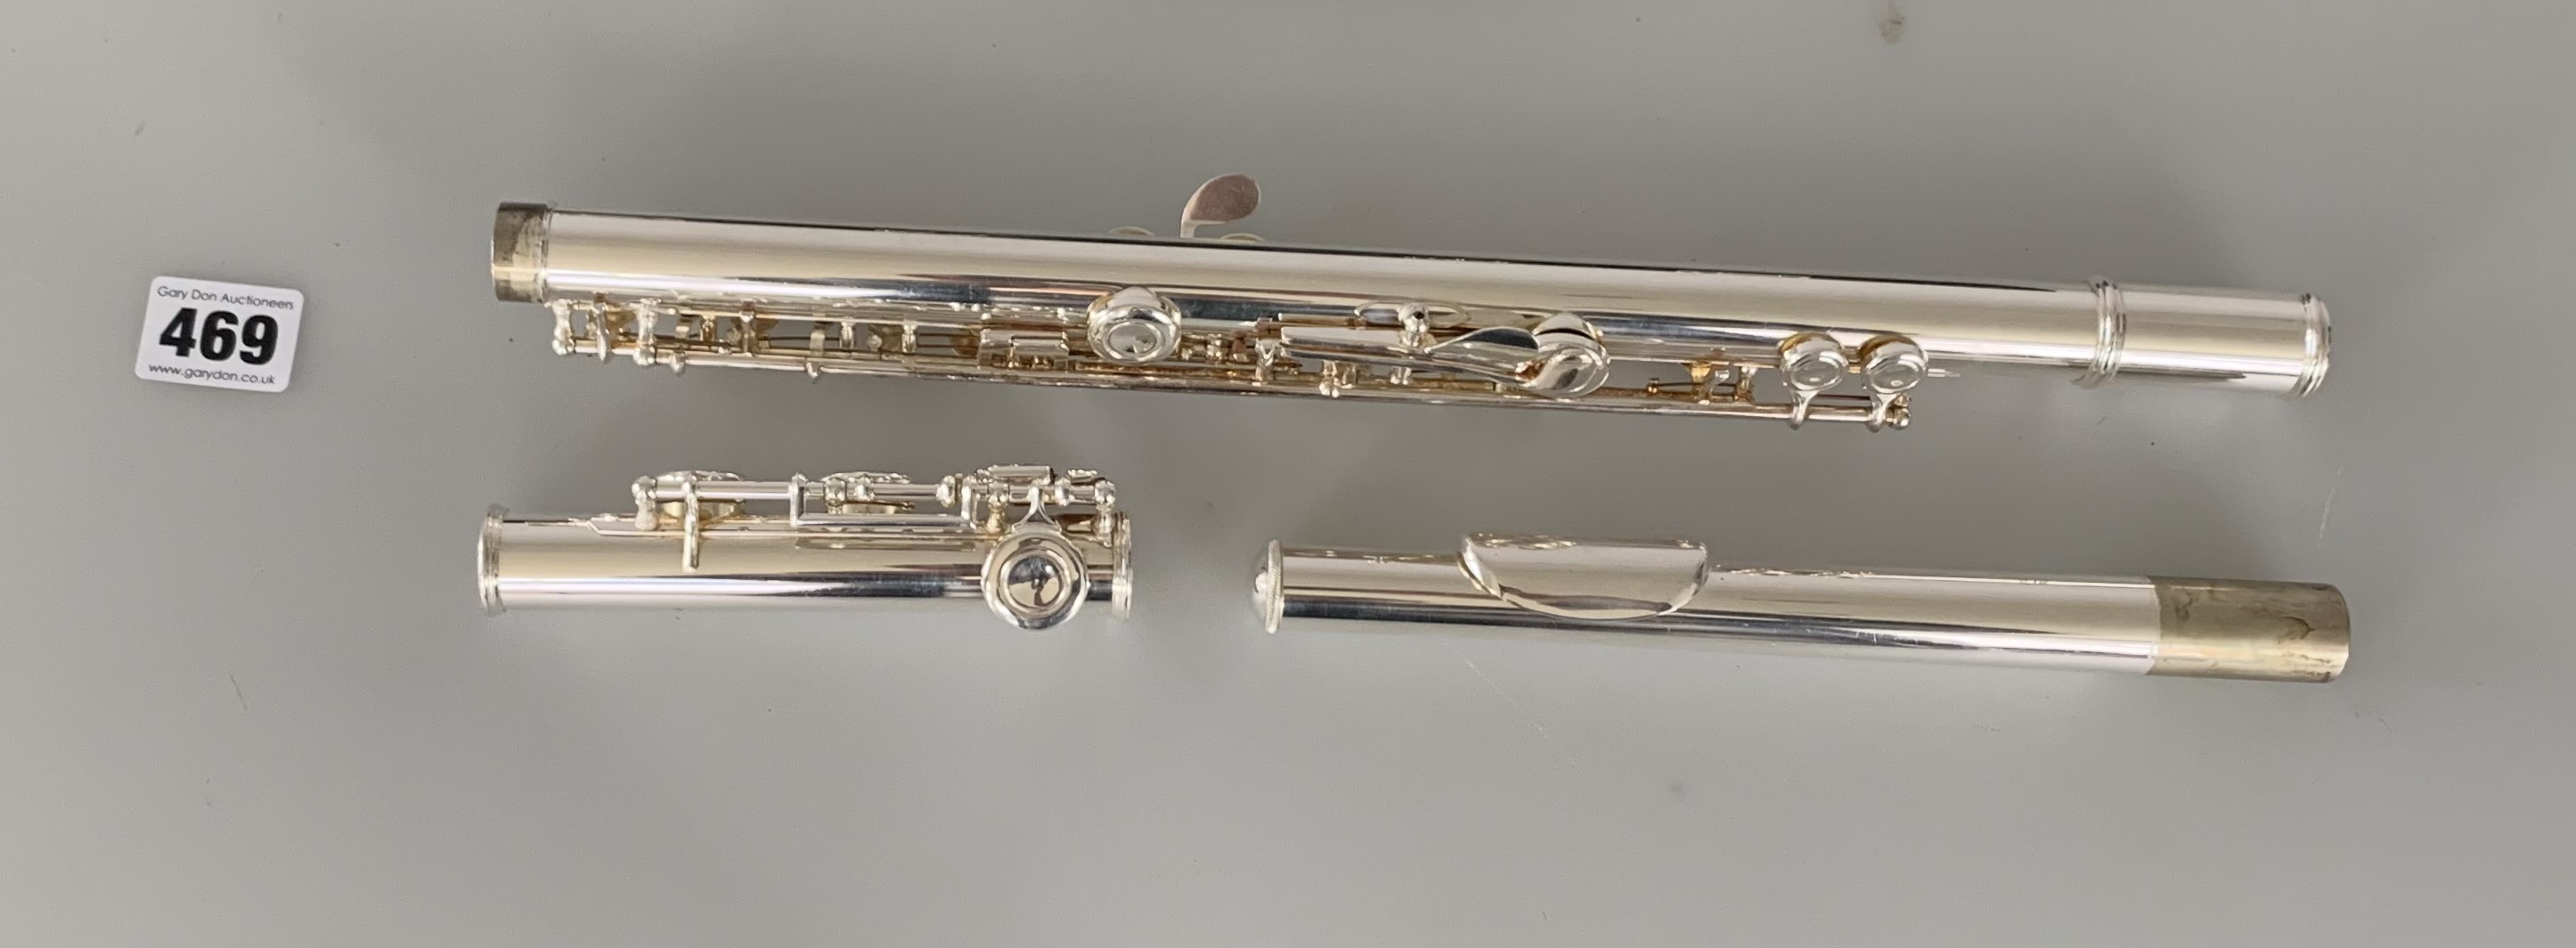 Boosey & Hawkes 400 flute in hard case - Image 3 of 4